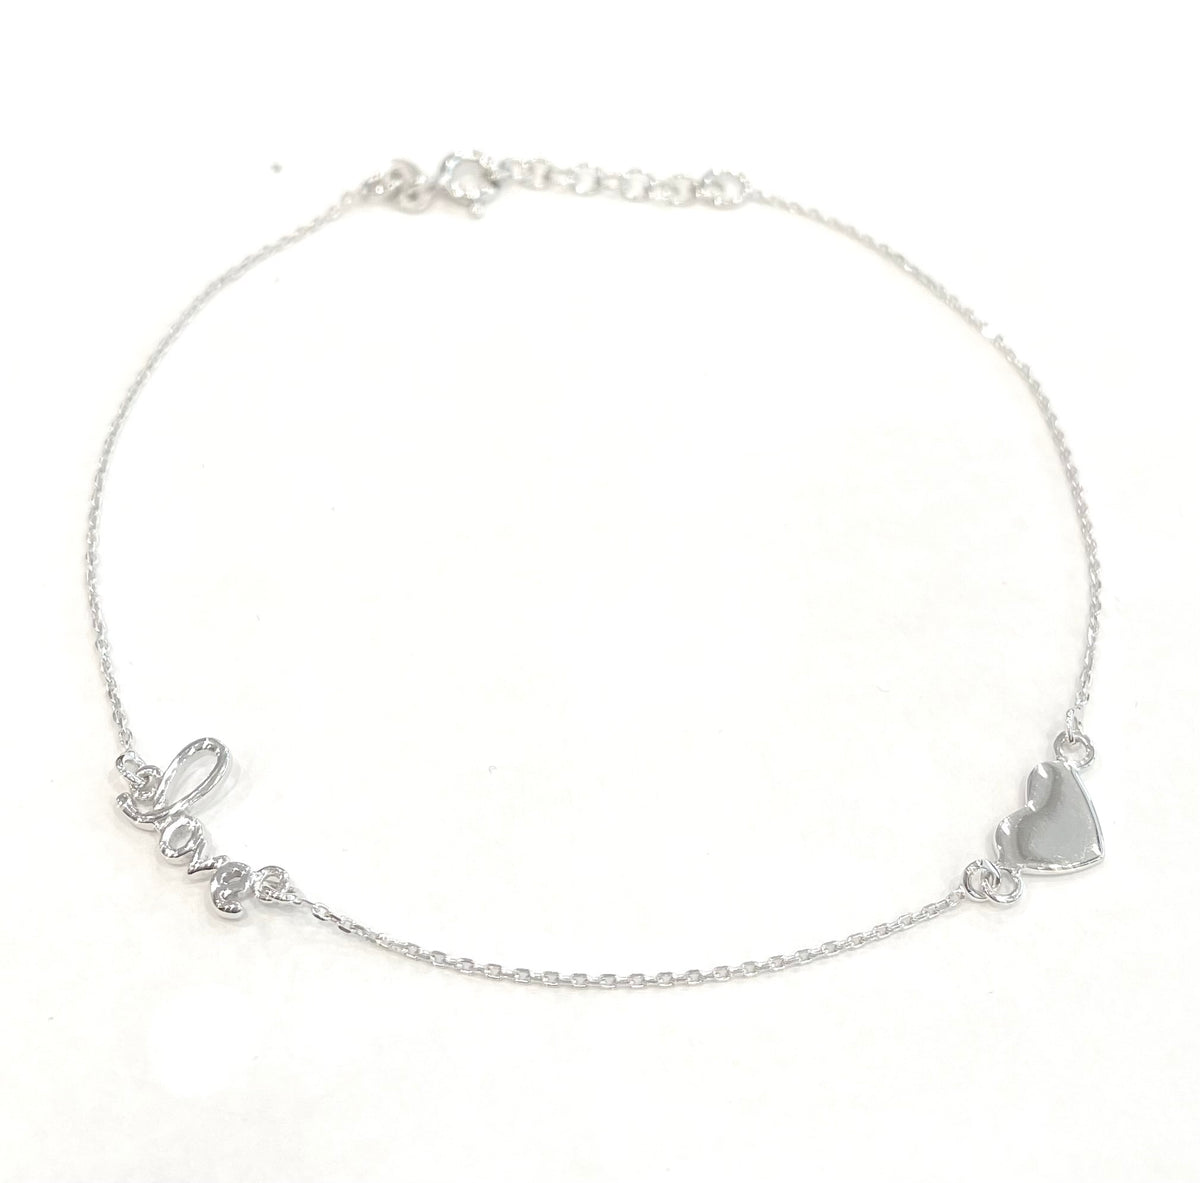 925 Sterling Silver Solid Heart and Love Text Anklet with Spring Clasp - Adjustable 18 - 20 Inches